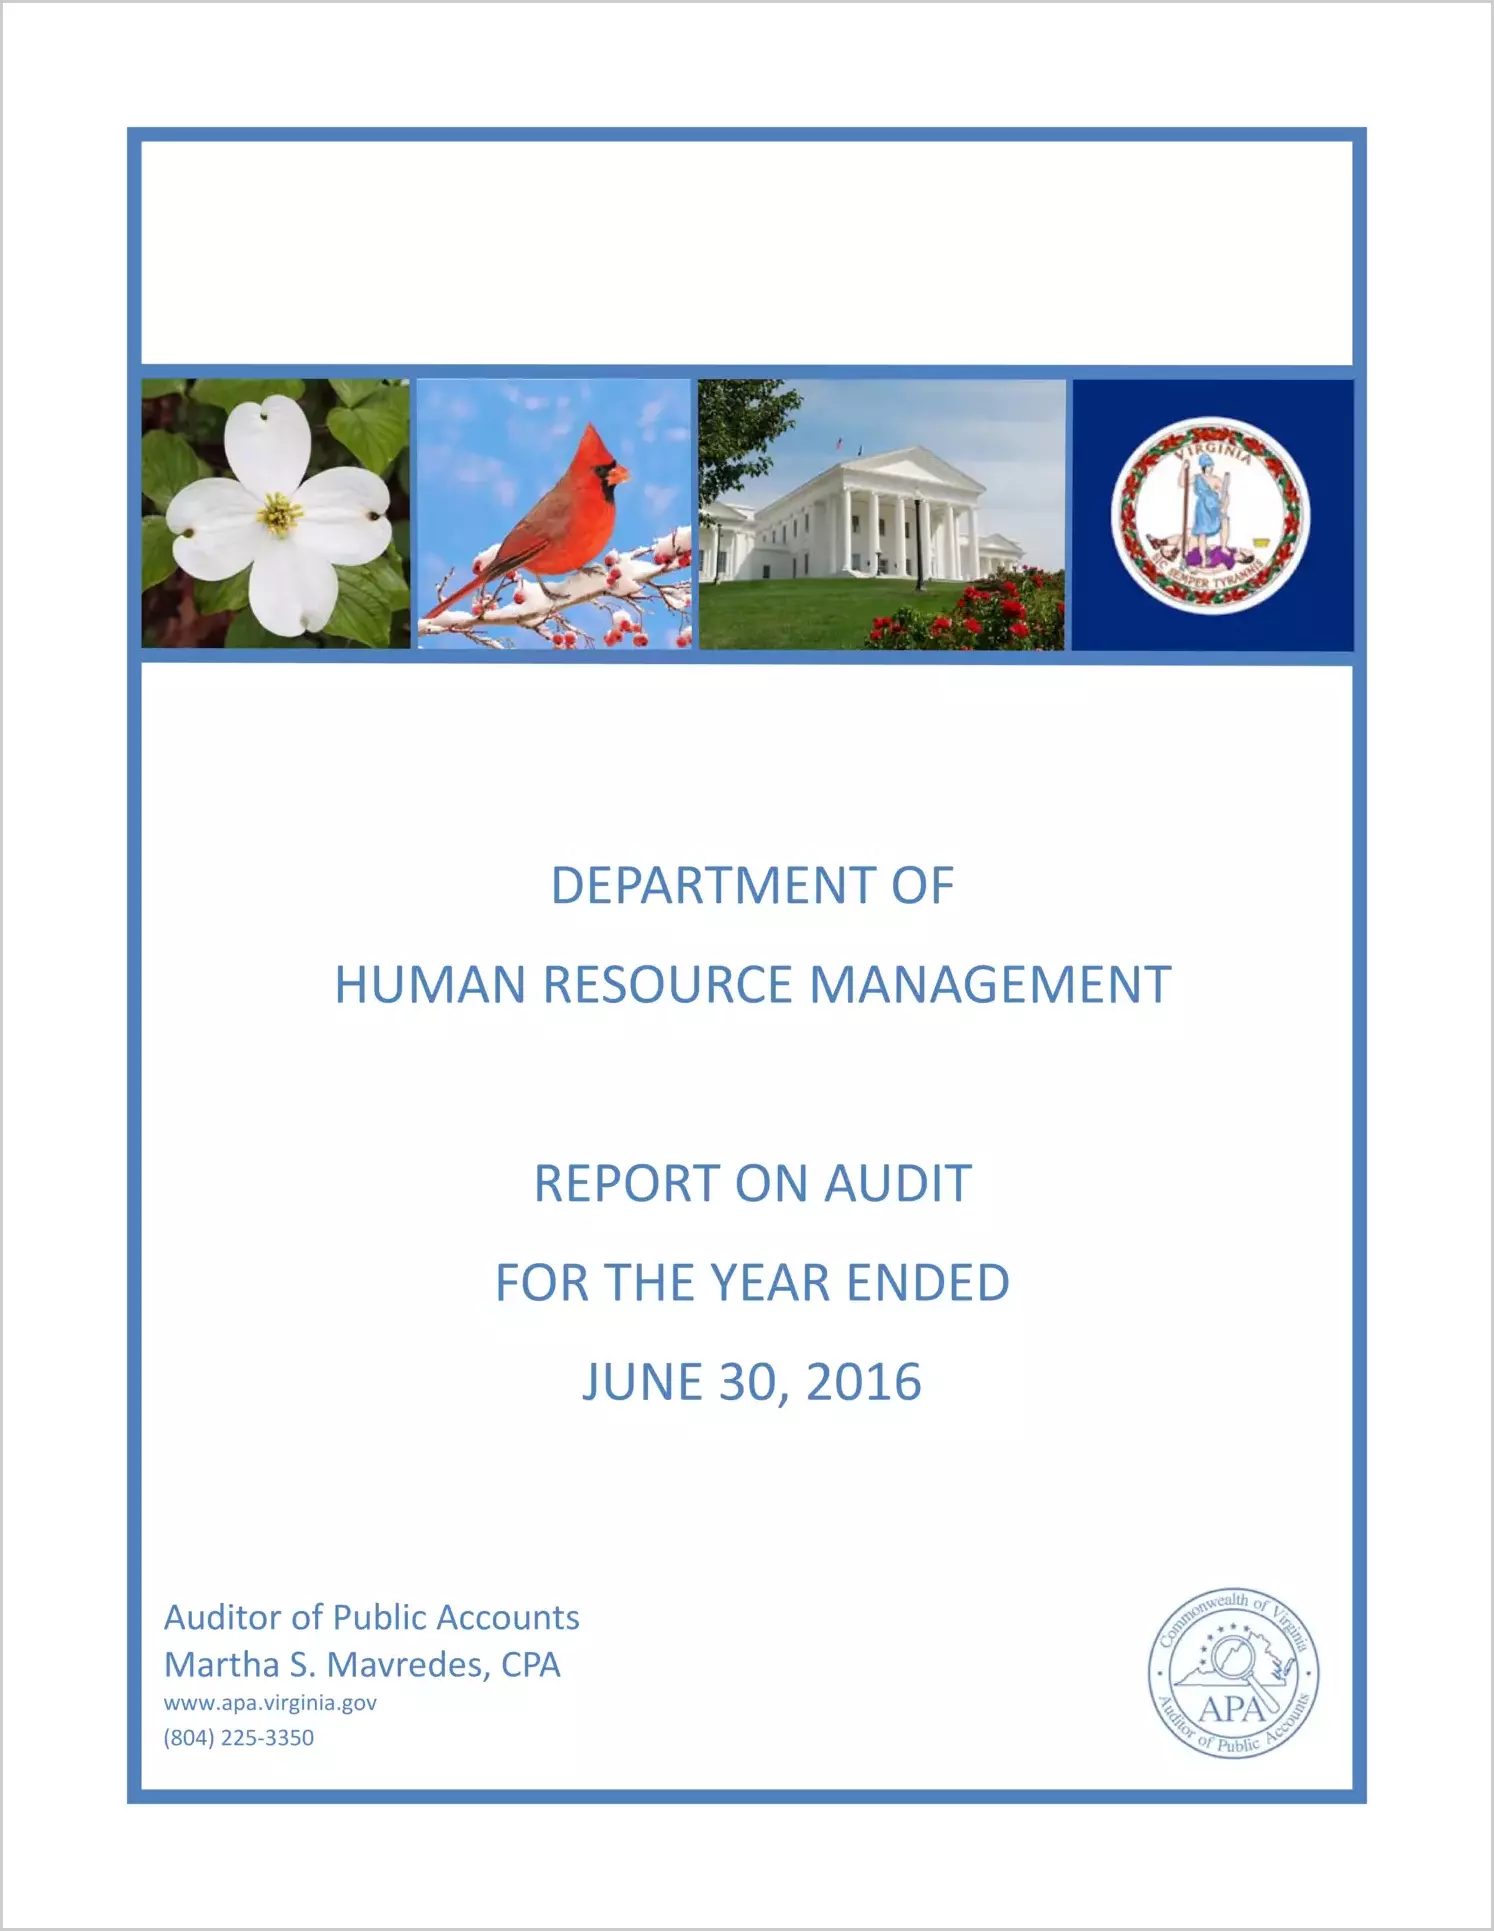 Department of Human Resource Management for the year ended June 30, 2016